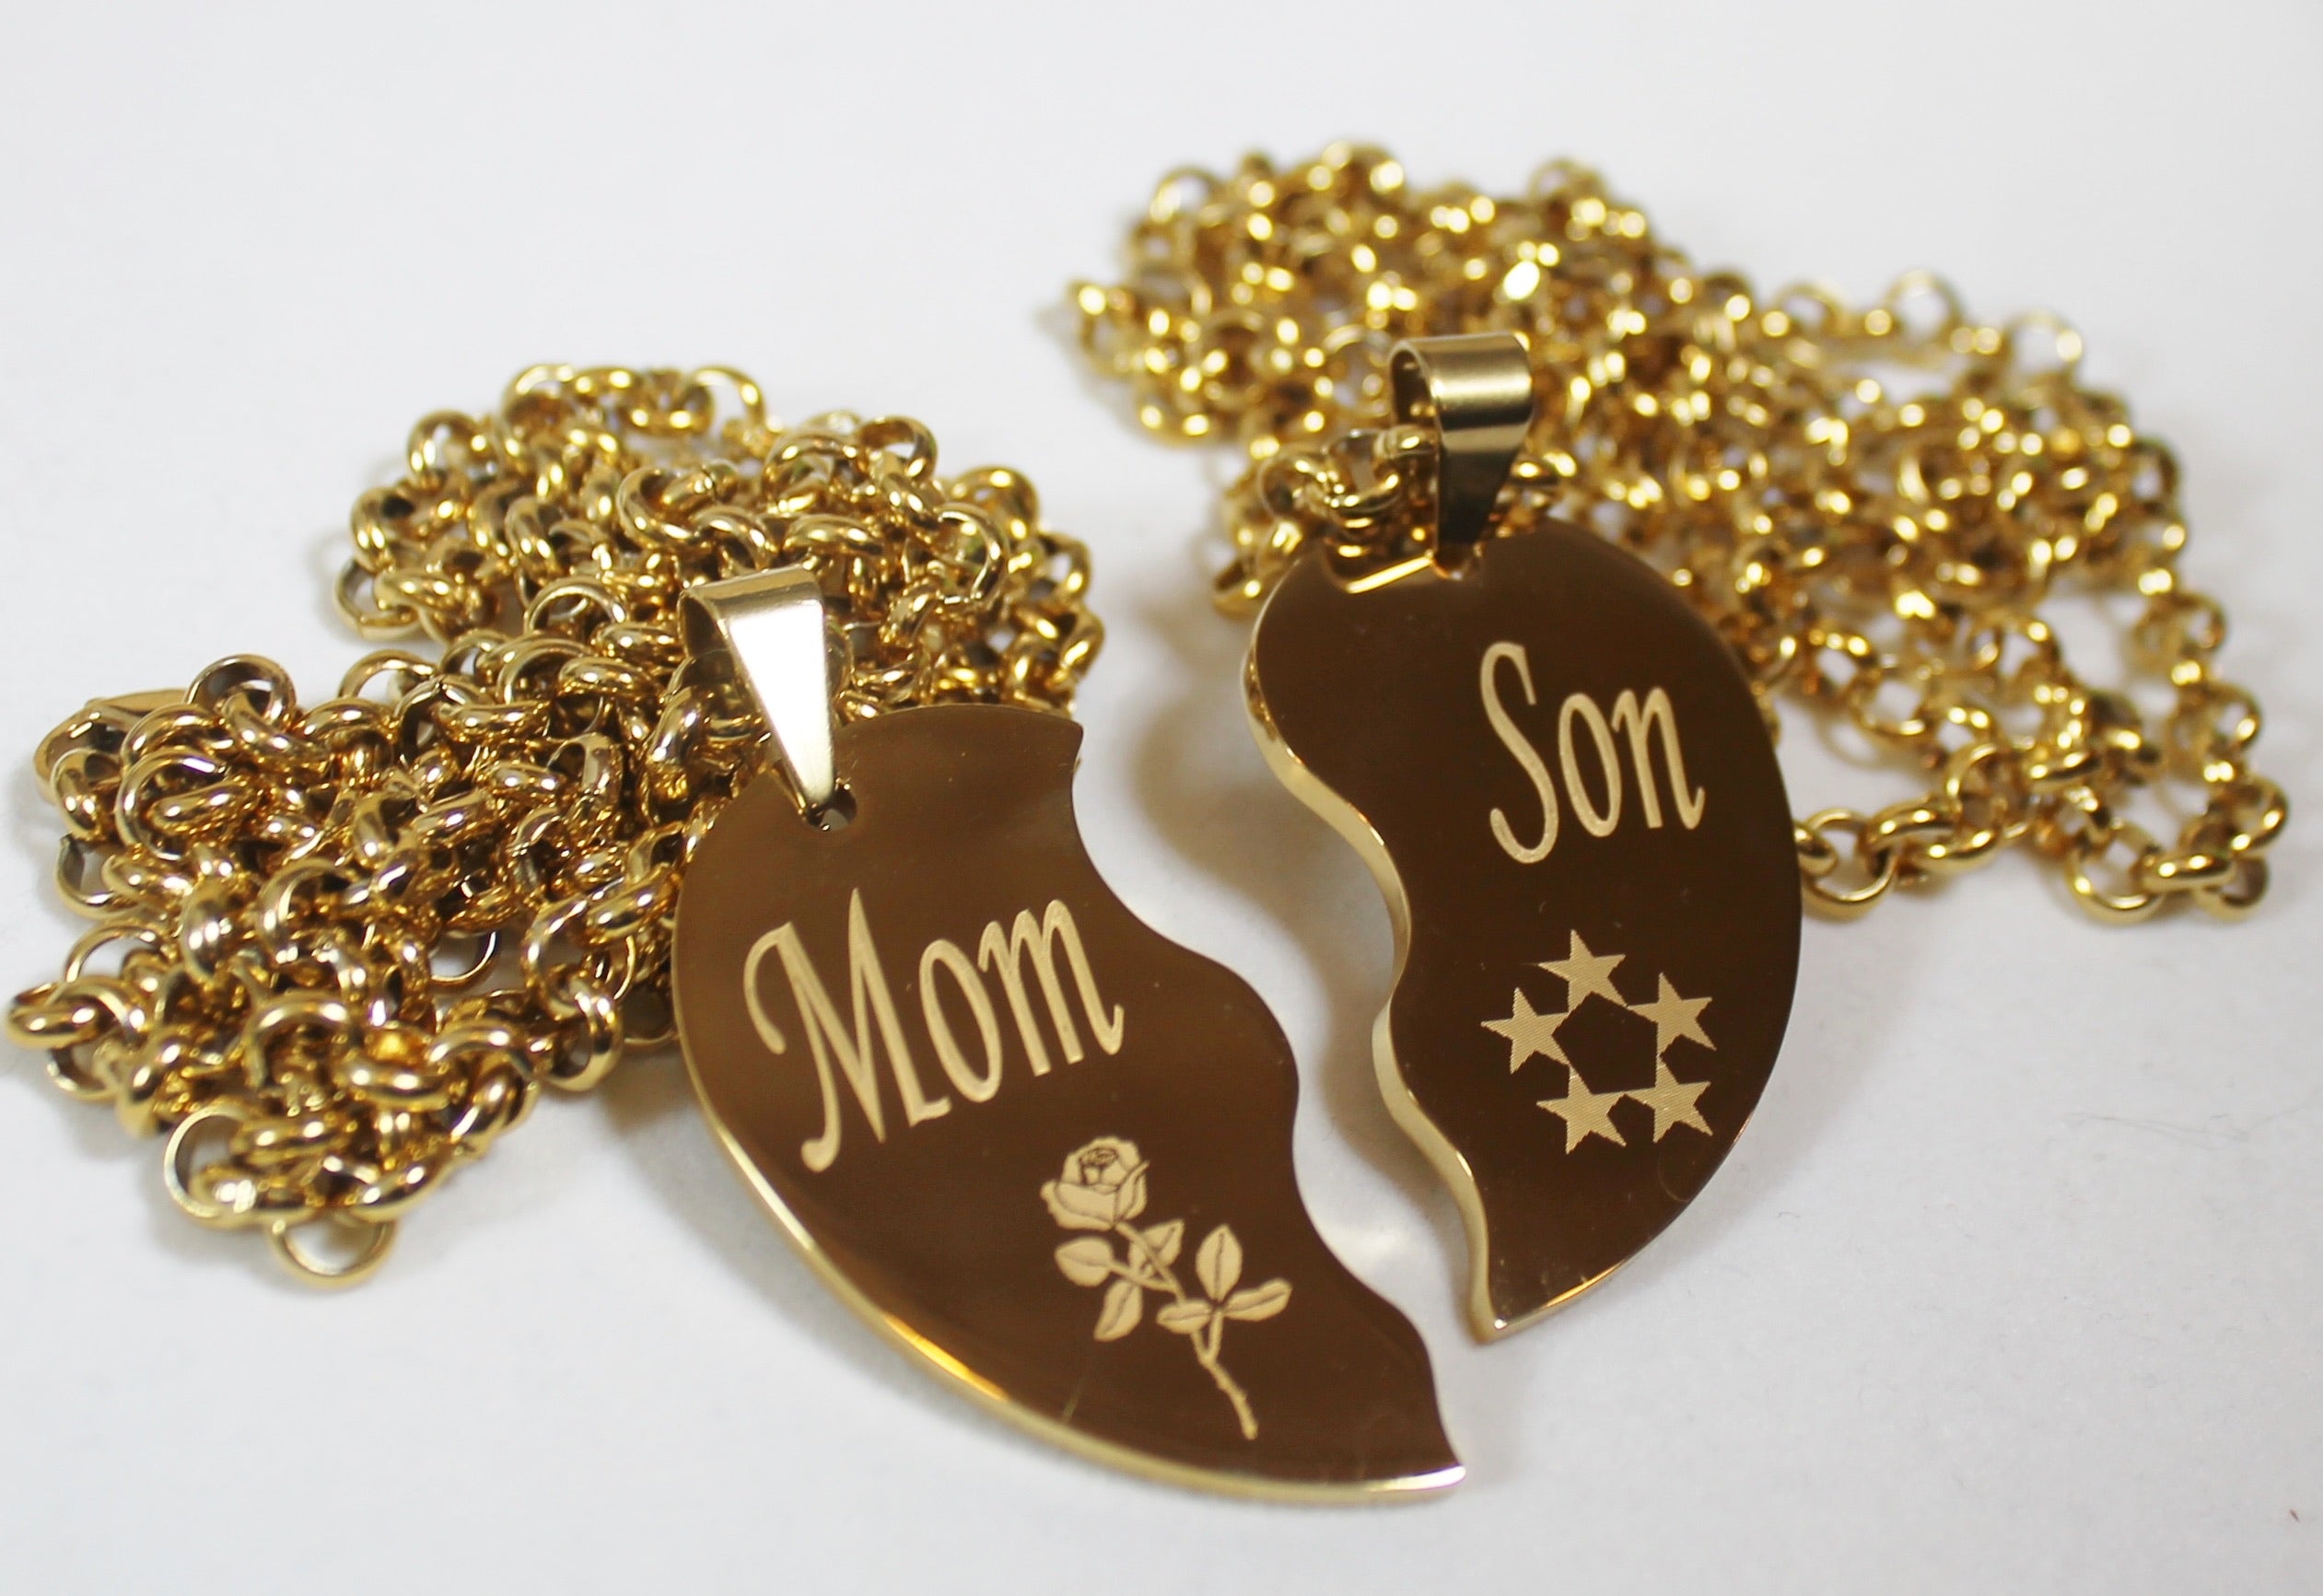 SPLIT HEART NECKLACE SOLID STAINLESS MOM SON IPG GOLD PLATED THICK PENDANTS - Samstagsandmore